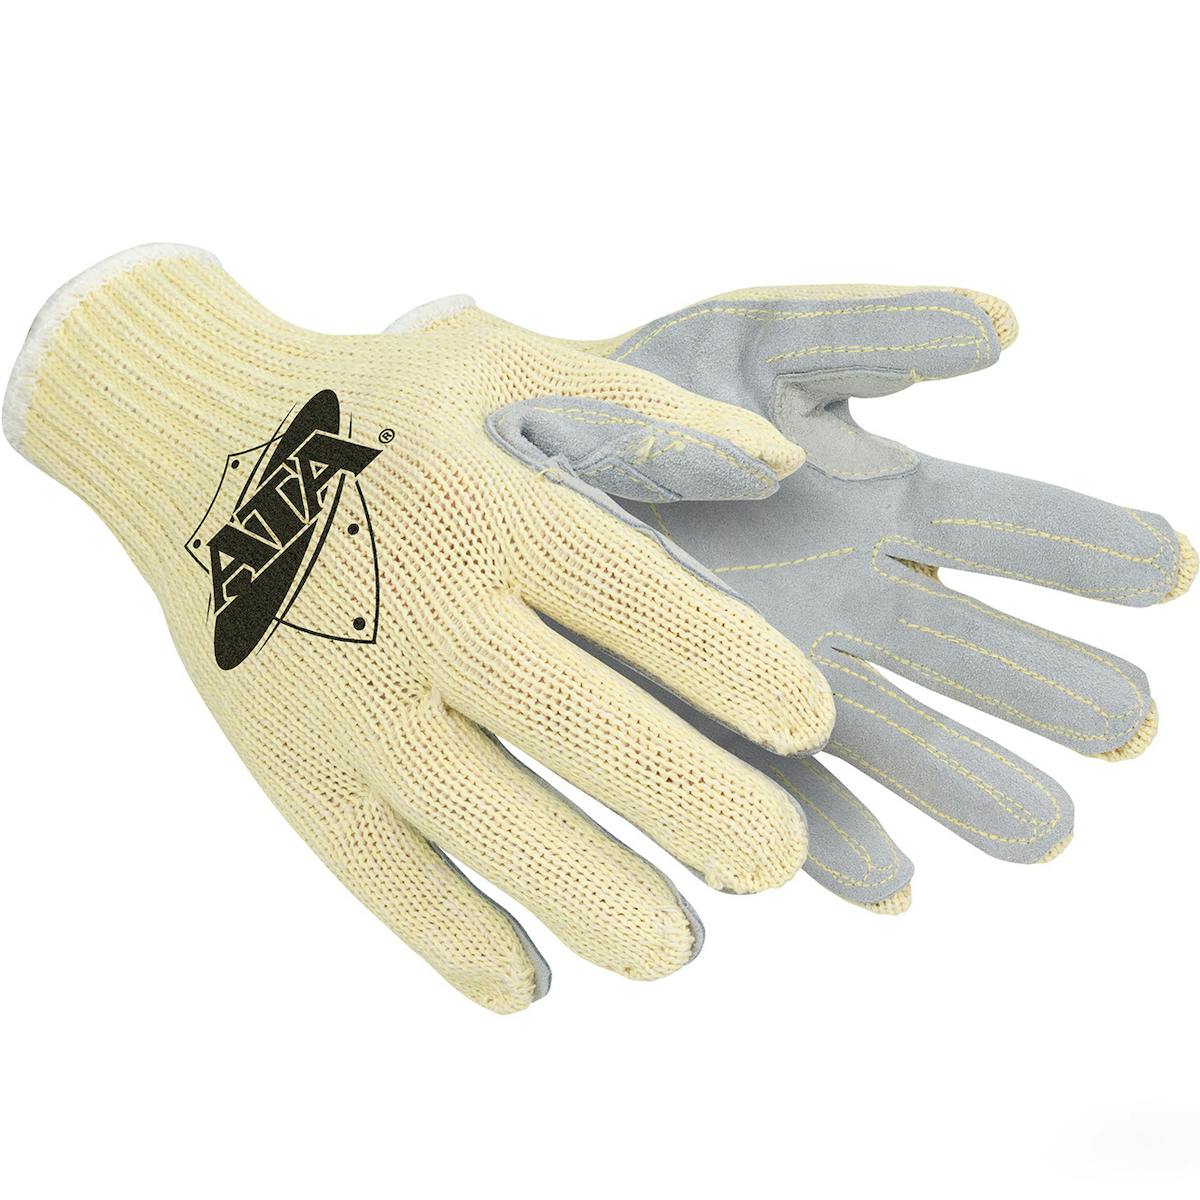 PIP® Seamless Knit ATA® Technology Blended Glove with Split Cowhide Leather Palm - Knit Wrist (MATA30-BH)